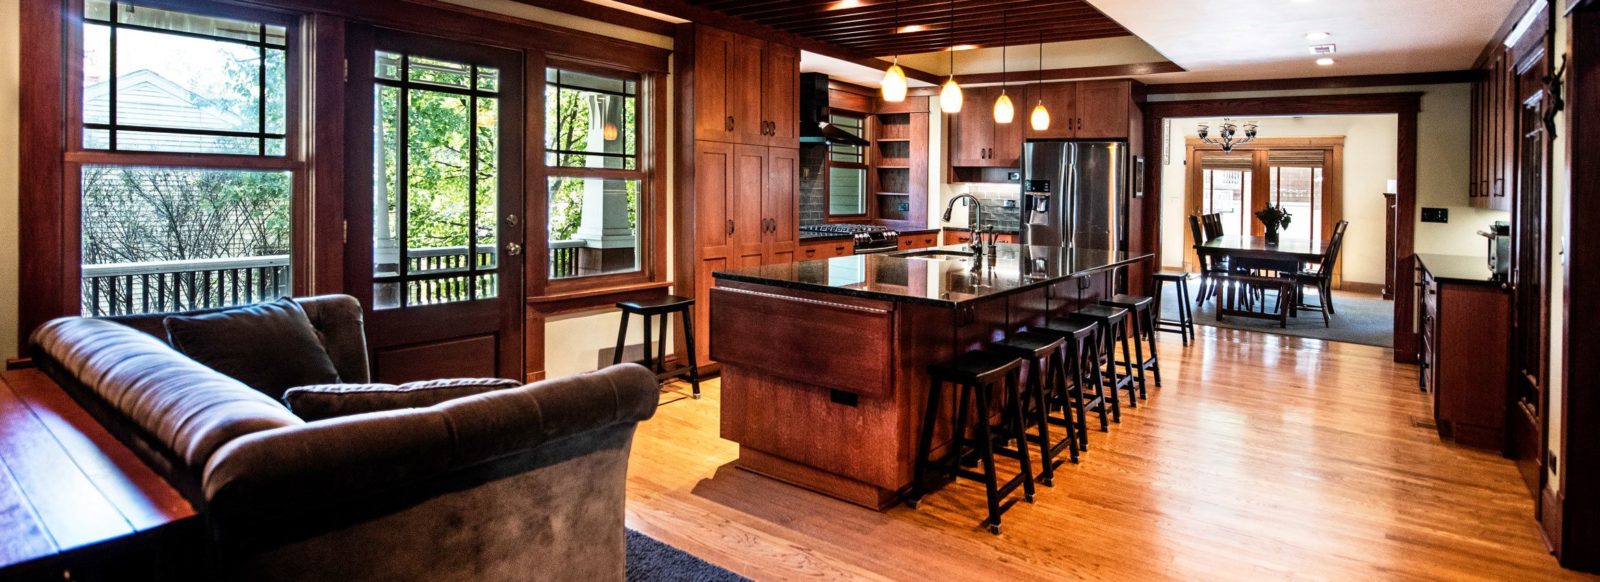 kitchen with dark cabinets and island with black countertop with 4 pendant lights